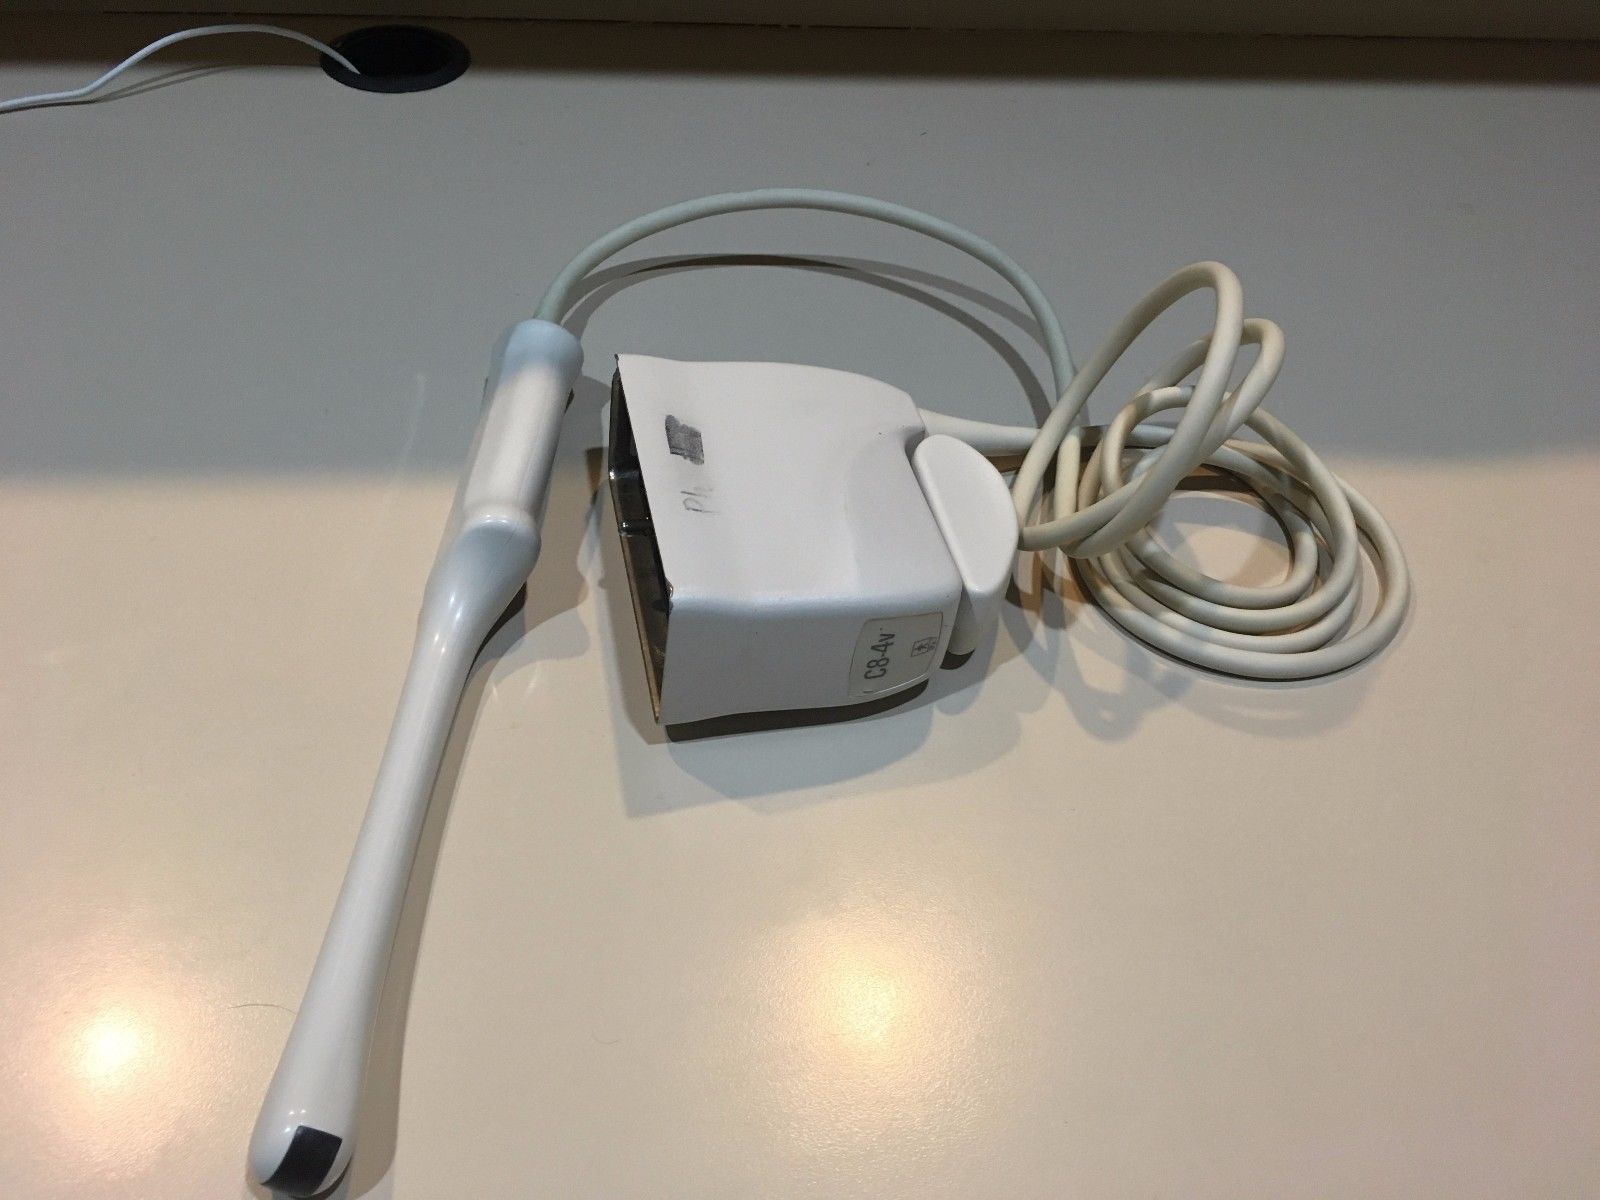 a cord connected to a probe on a table